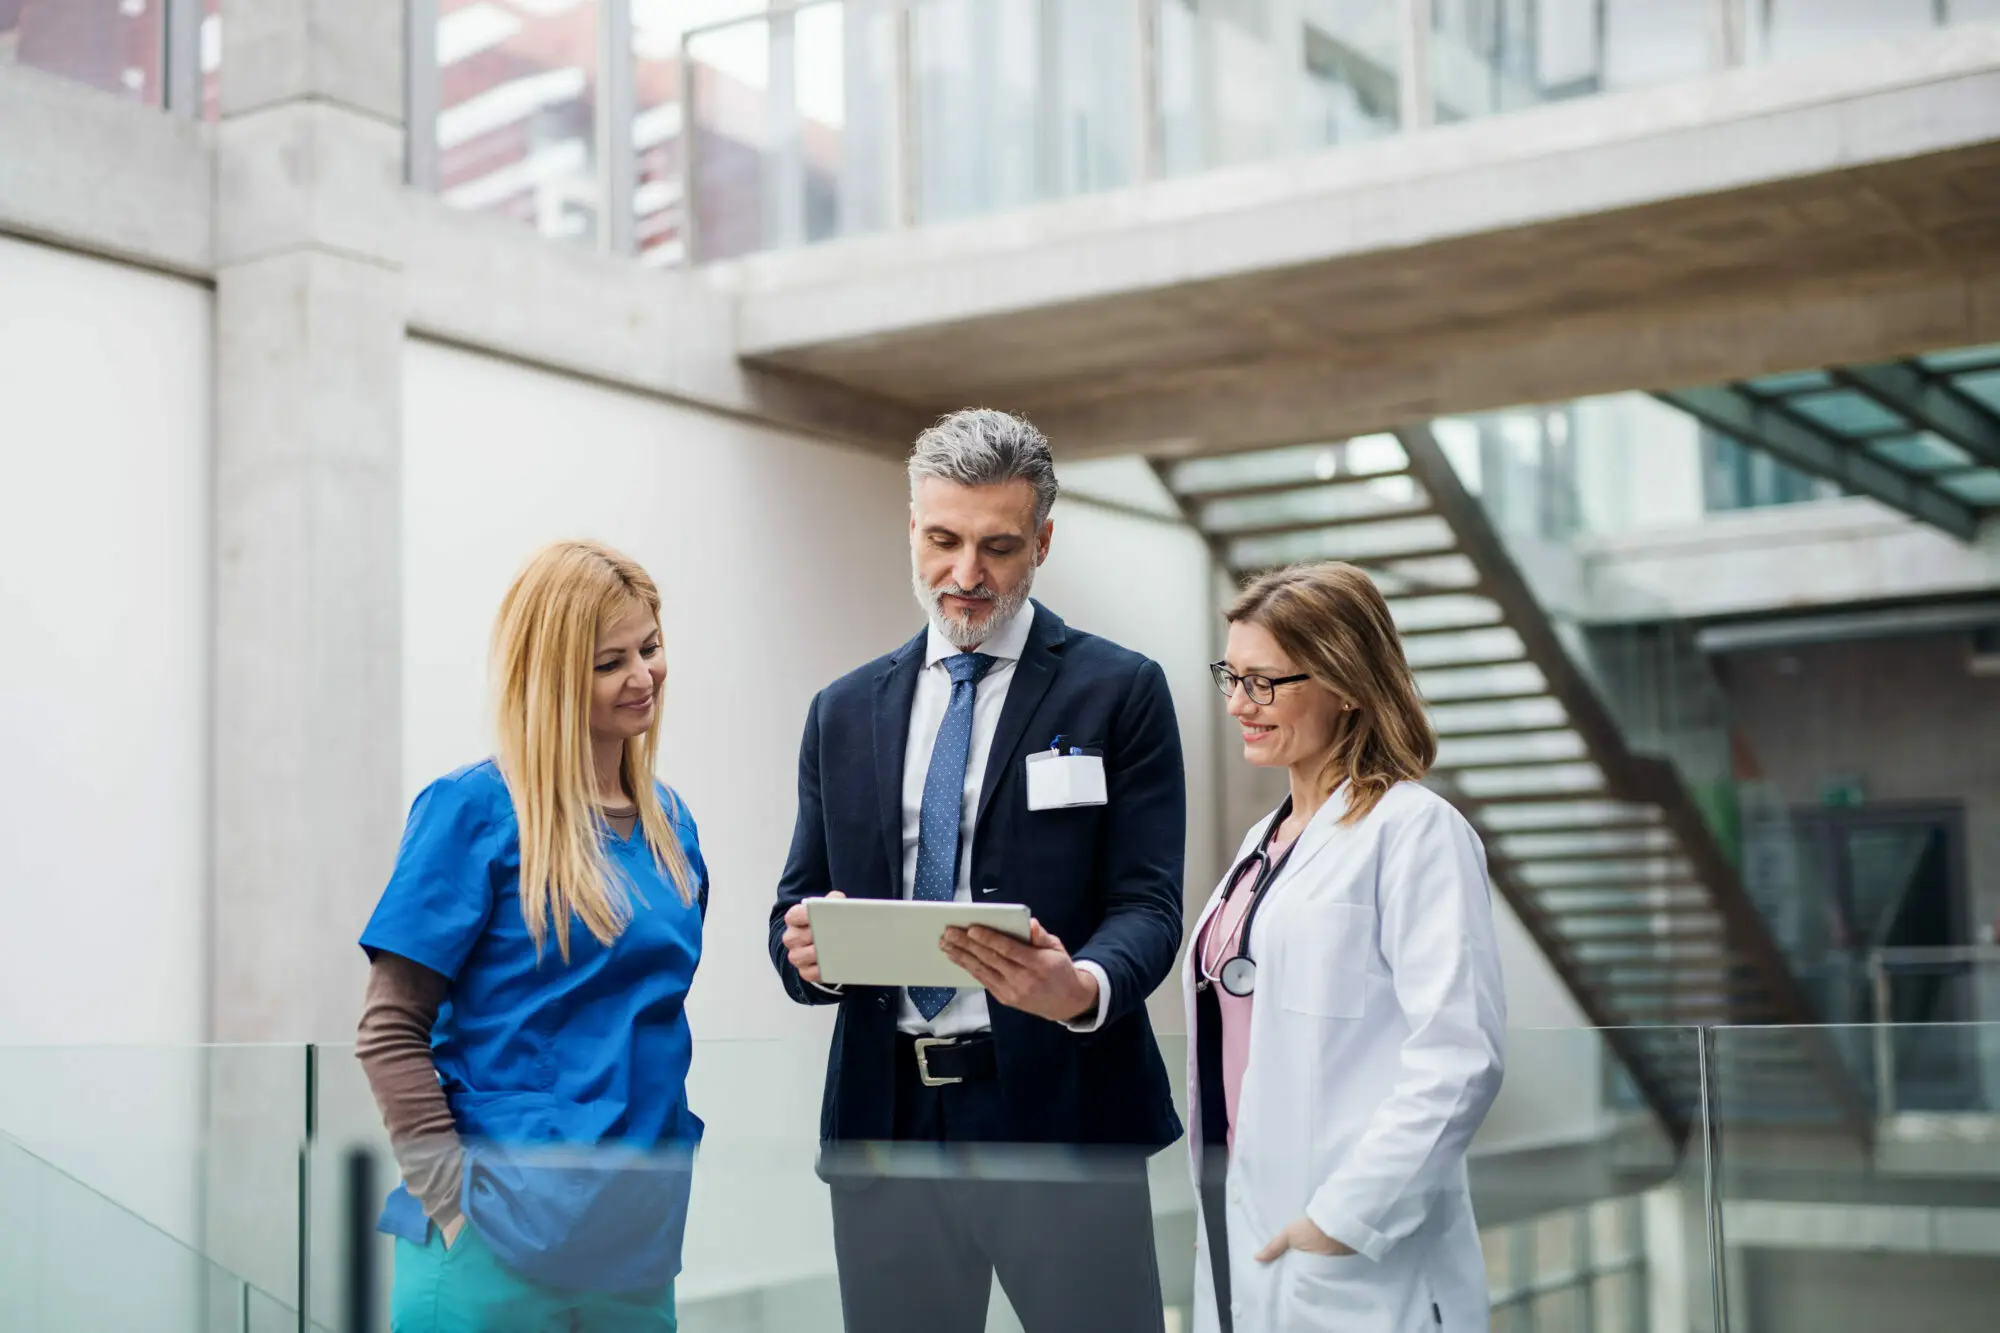 Group of doctors talking to a medical device sales representative, highlighting healthcare communication, medical inventory management, care coordination, and integrated healthcare.